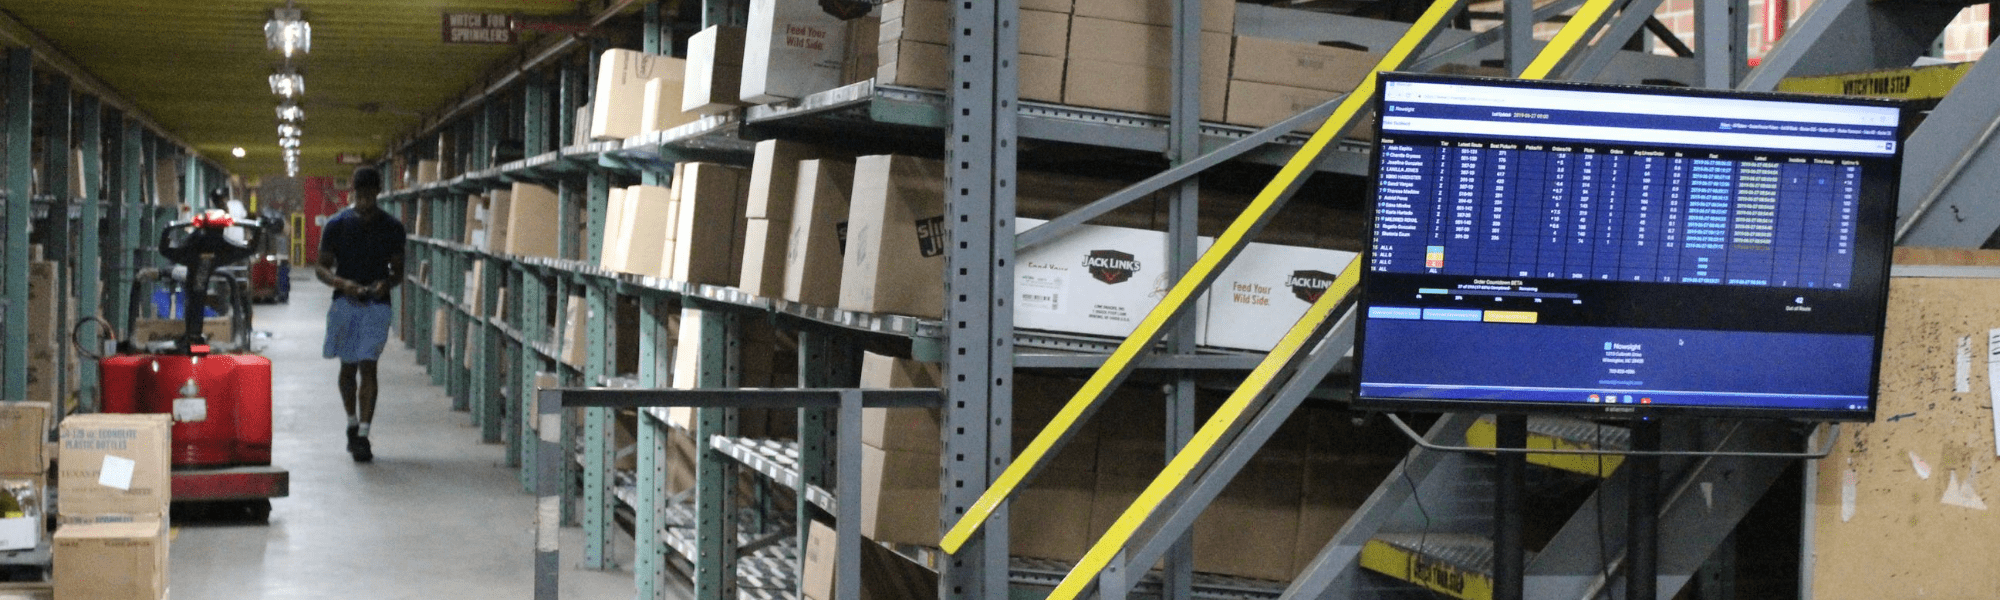 Distribution Warehouse Floor Dashboards: Taking Productivity to the Next Level